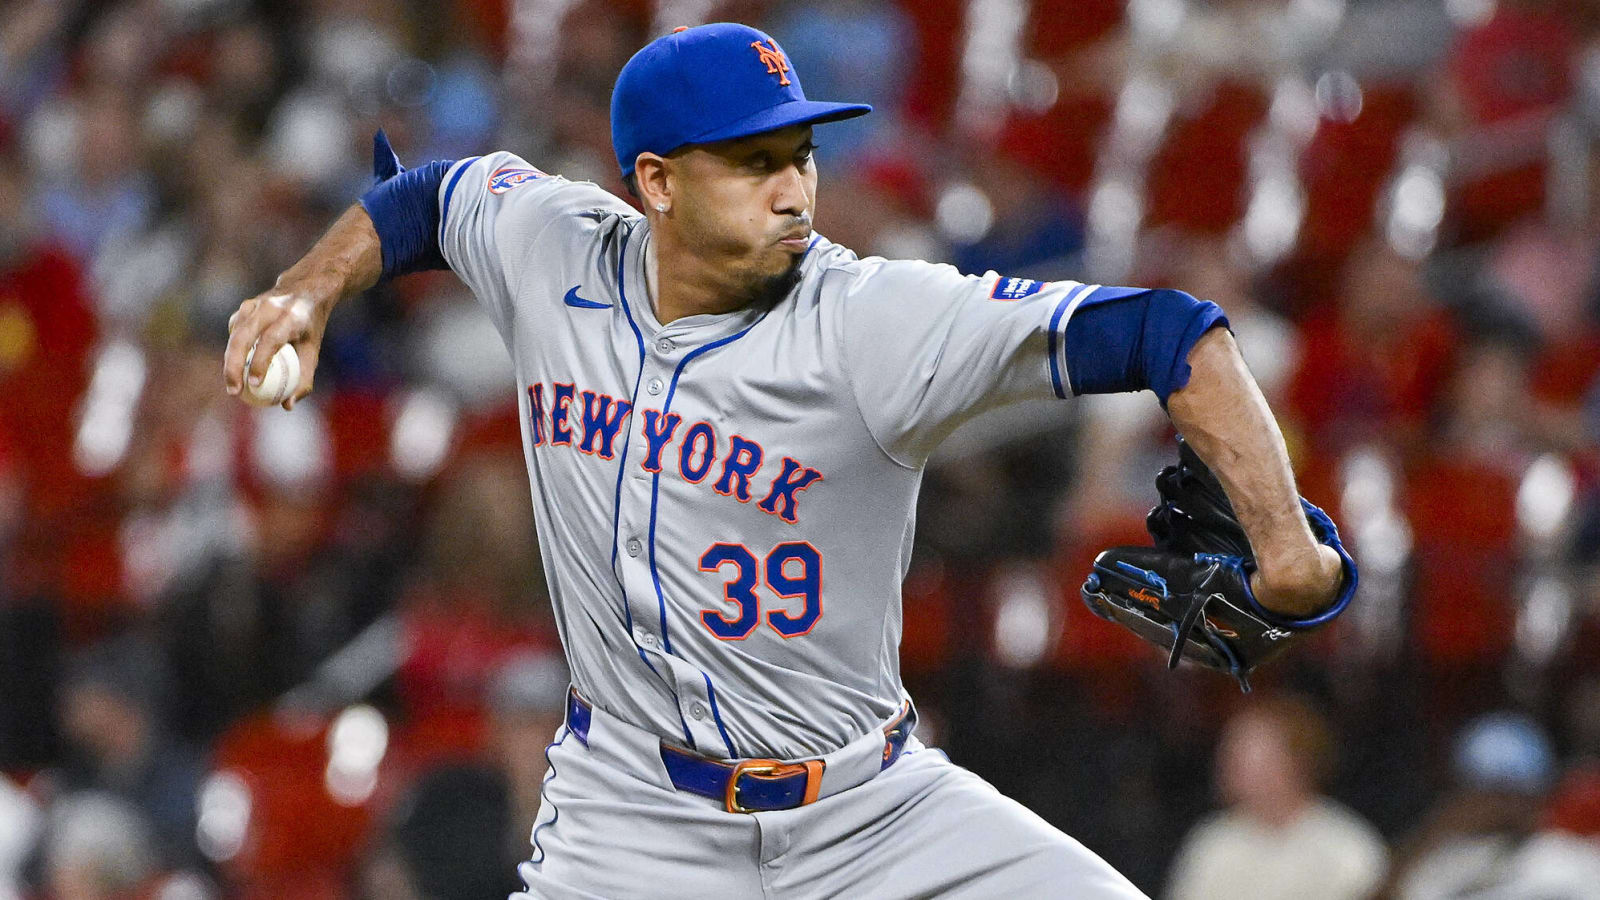 Mets star has theory about Edwin Diaz's recent struggles